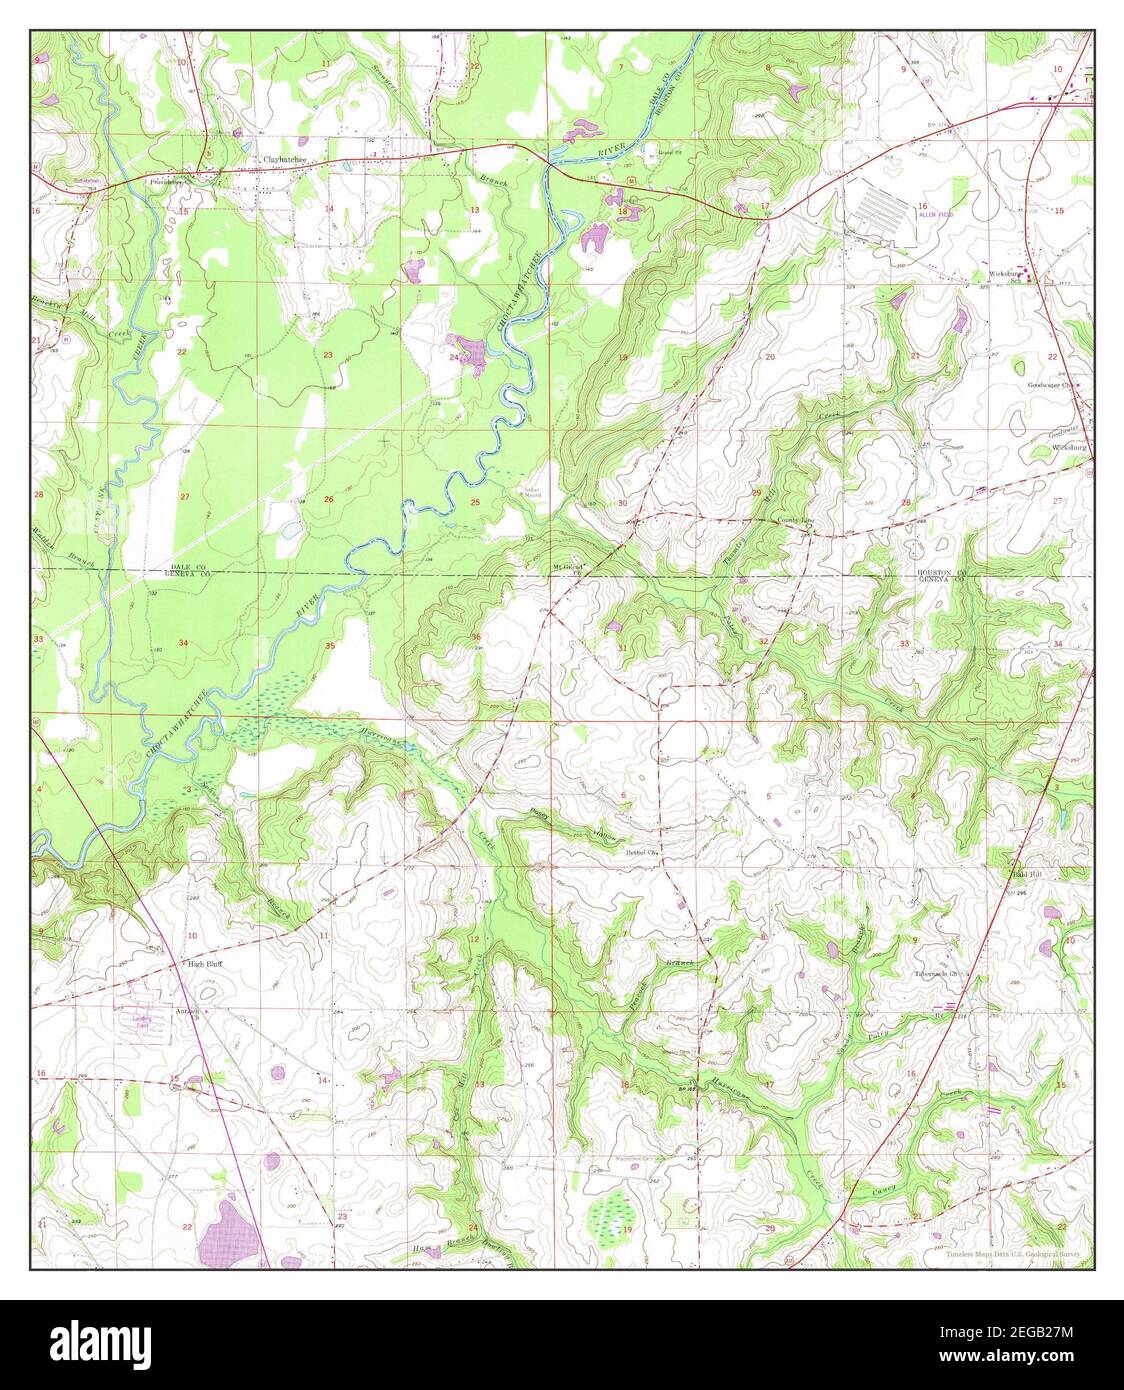 Clayhatchee, Alabama, map 1957, 1:24000, United States of America by Timeless Maps, data U.S. Geological Survey Stock Photo